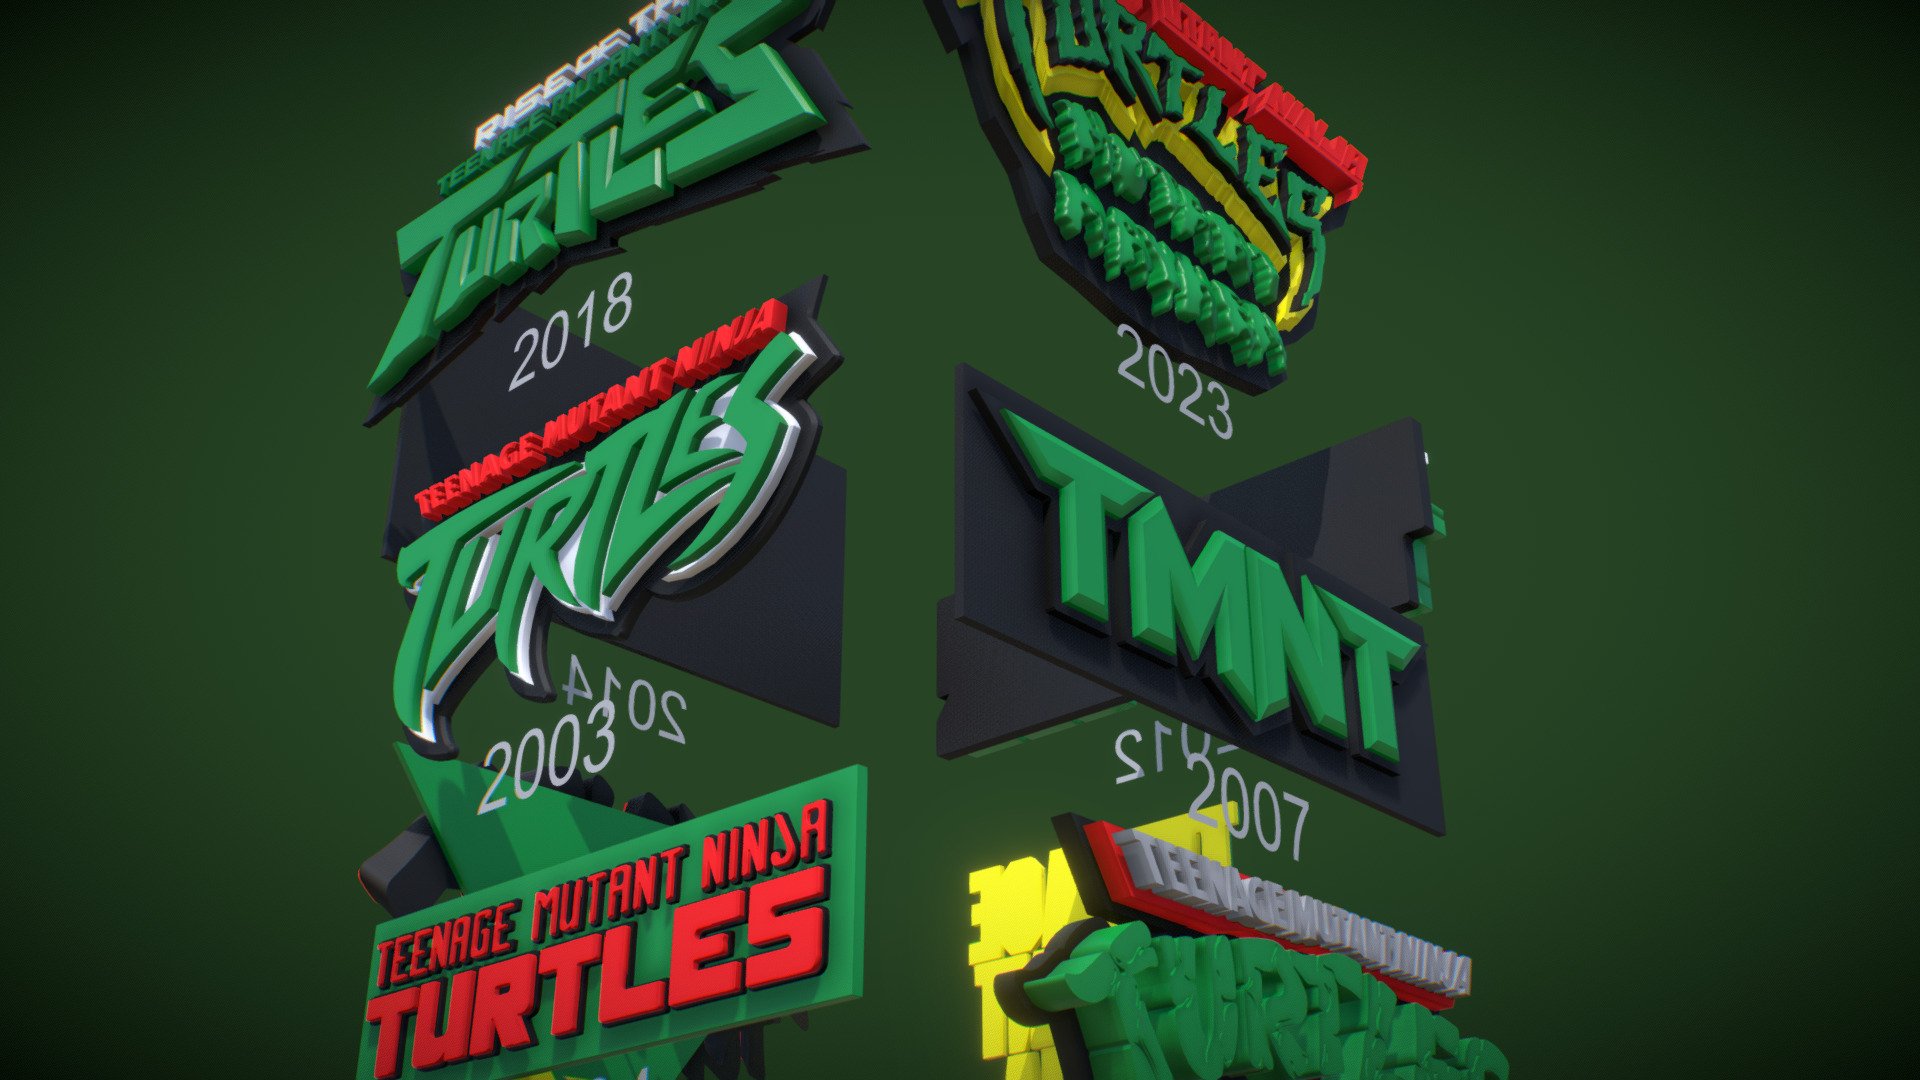 TMNT all logos 1984 - 2023 Renderable and Printable versions

Ready to render low poly Ready to print stl full and splitted shapes for printing

Formats: OBJ, FBX, STL, MAX 2020

LOGOS:

1984 - Comic version Logo.

1987 – 1996 - Teenage Mutant Ninja Turtles classic series El primer logotipo de las Tortugas Ninja se introdujo en 1987 y permaneció intacto durante casi diez años.

1990 - Teenage Mutant Ninja Turtles Movie (1990)

2003 – 2006

TMNT 2007 Movie

Teenage Mutant Ninja Turtles Movie (2014)

2010 

2012 – 2017 La franquicia usó un logotipo geométrico muy brillante de 2012 a 2017.

2018 – 2020 - Rise of the Teenage Mutant Ninja Turtles 2018 

2022 –

Teenage Mutant Ninja Turtles was created by American comic book authors Kevin Eastman and Peter Laird in 1984. The original comics followed Leonardo, Raphael, Donatello and Michelangelo. The classic animated series premiered in 1987 and ran for almost a decade 3d model